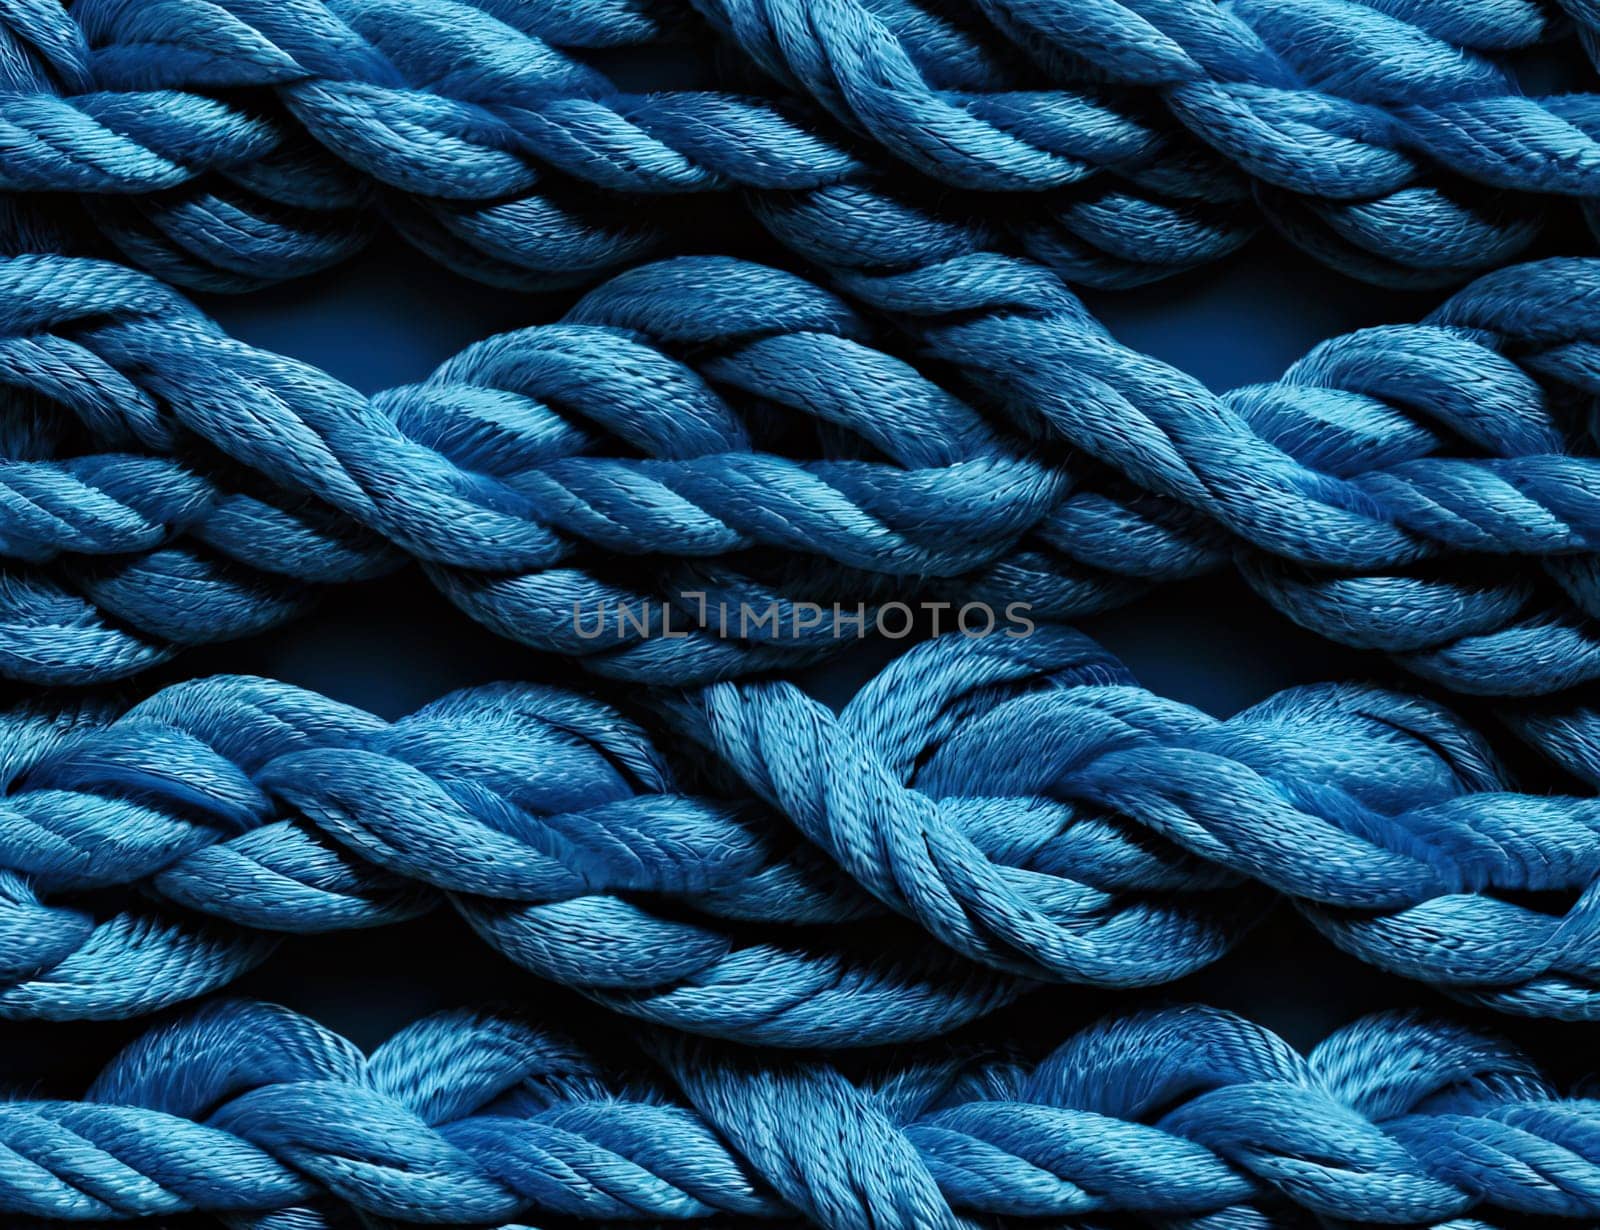 blue background from a soft textile material. sheathing fabric with texture. Cloth backdrop.